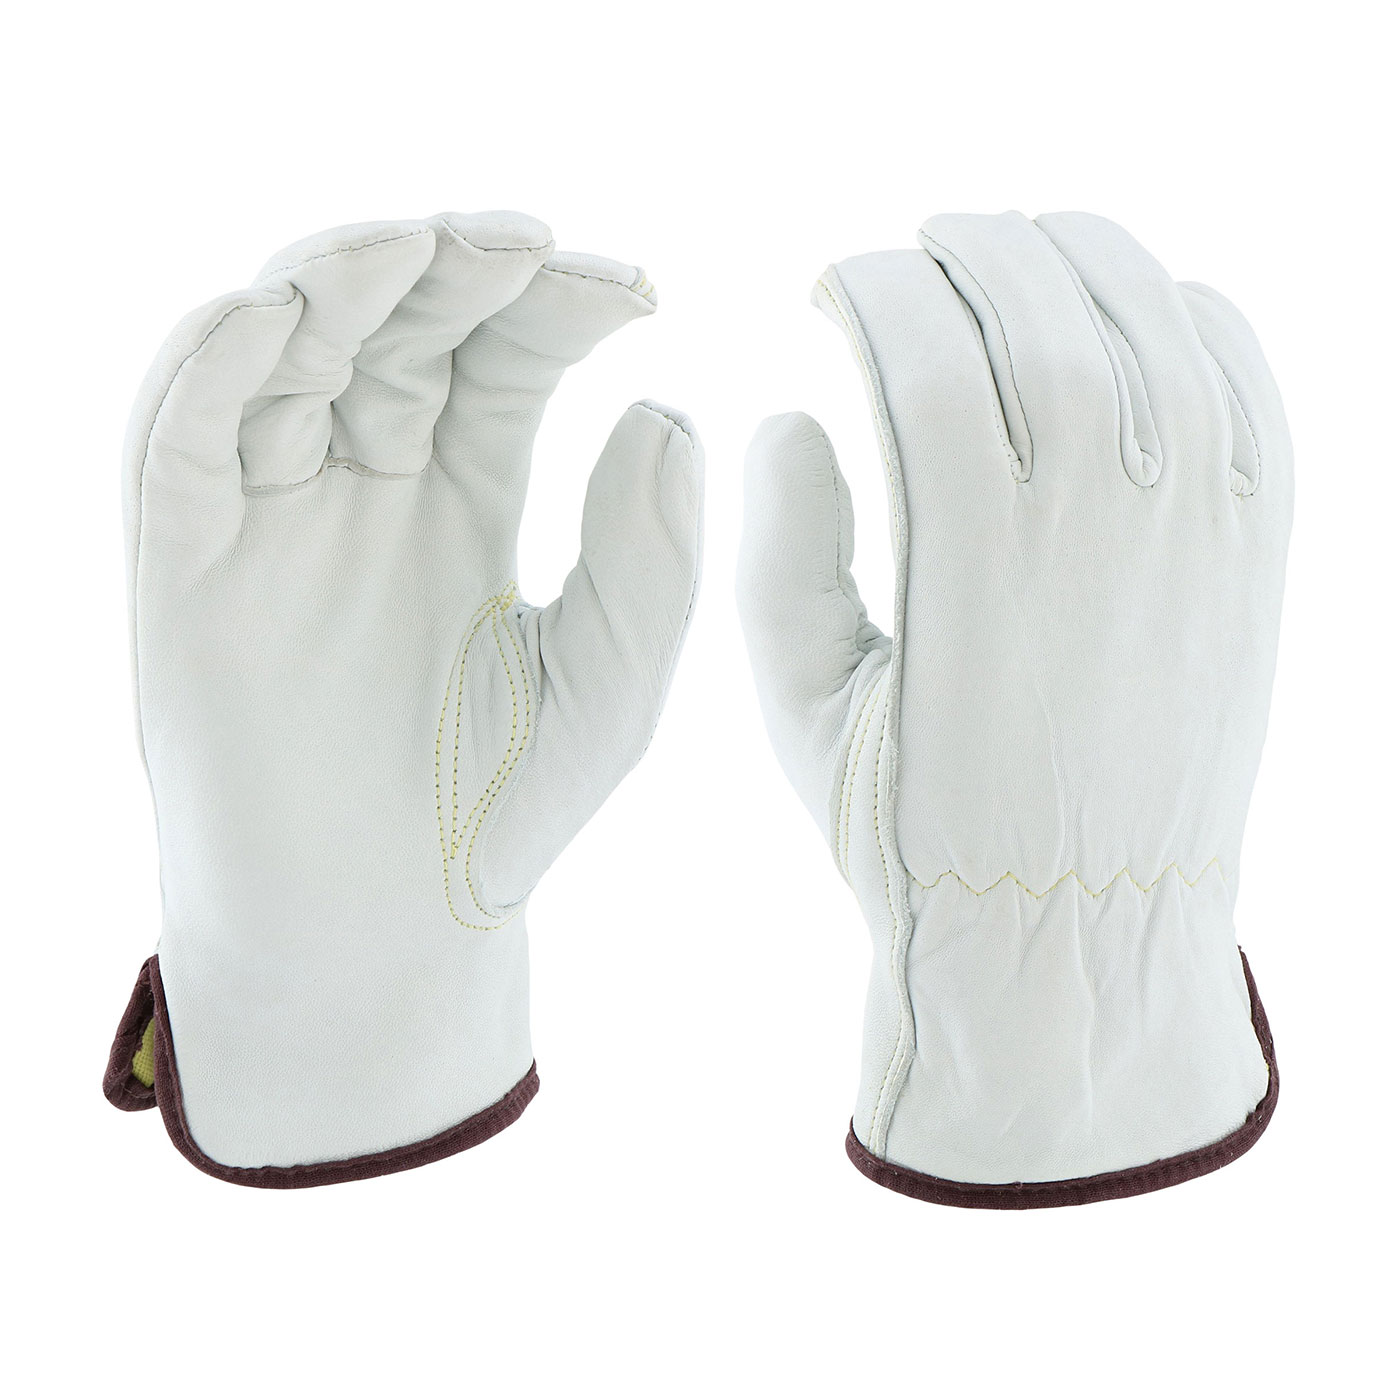 PIP® 9110/2XL Cut and Sewn Standard Grade Cut-Resistant Gloves, 2XL, Sheep Grain Leather, Slip-On Cuff, Resists: Abrasion, Cut, Puncture and Tear, ANSI Cut-Resistance Level: A4, Paired Hand